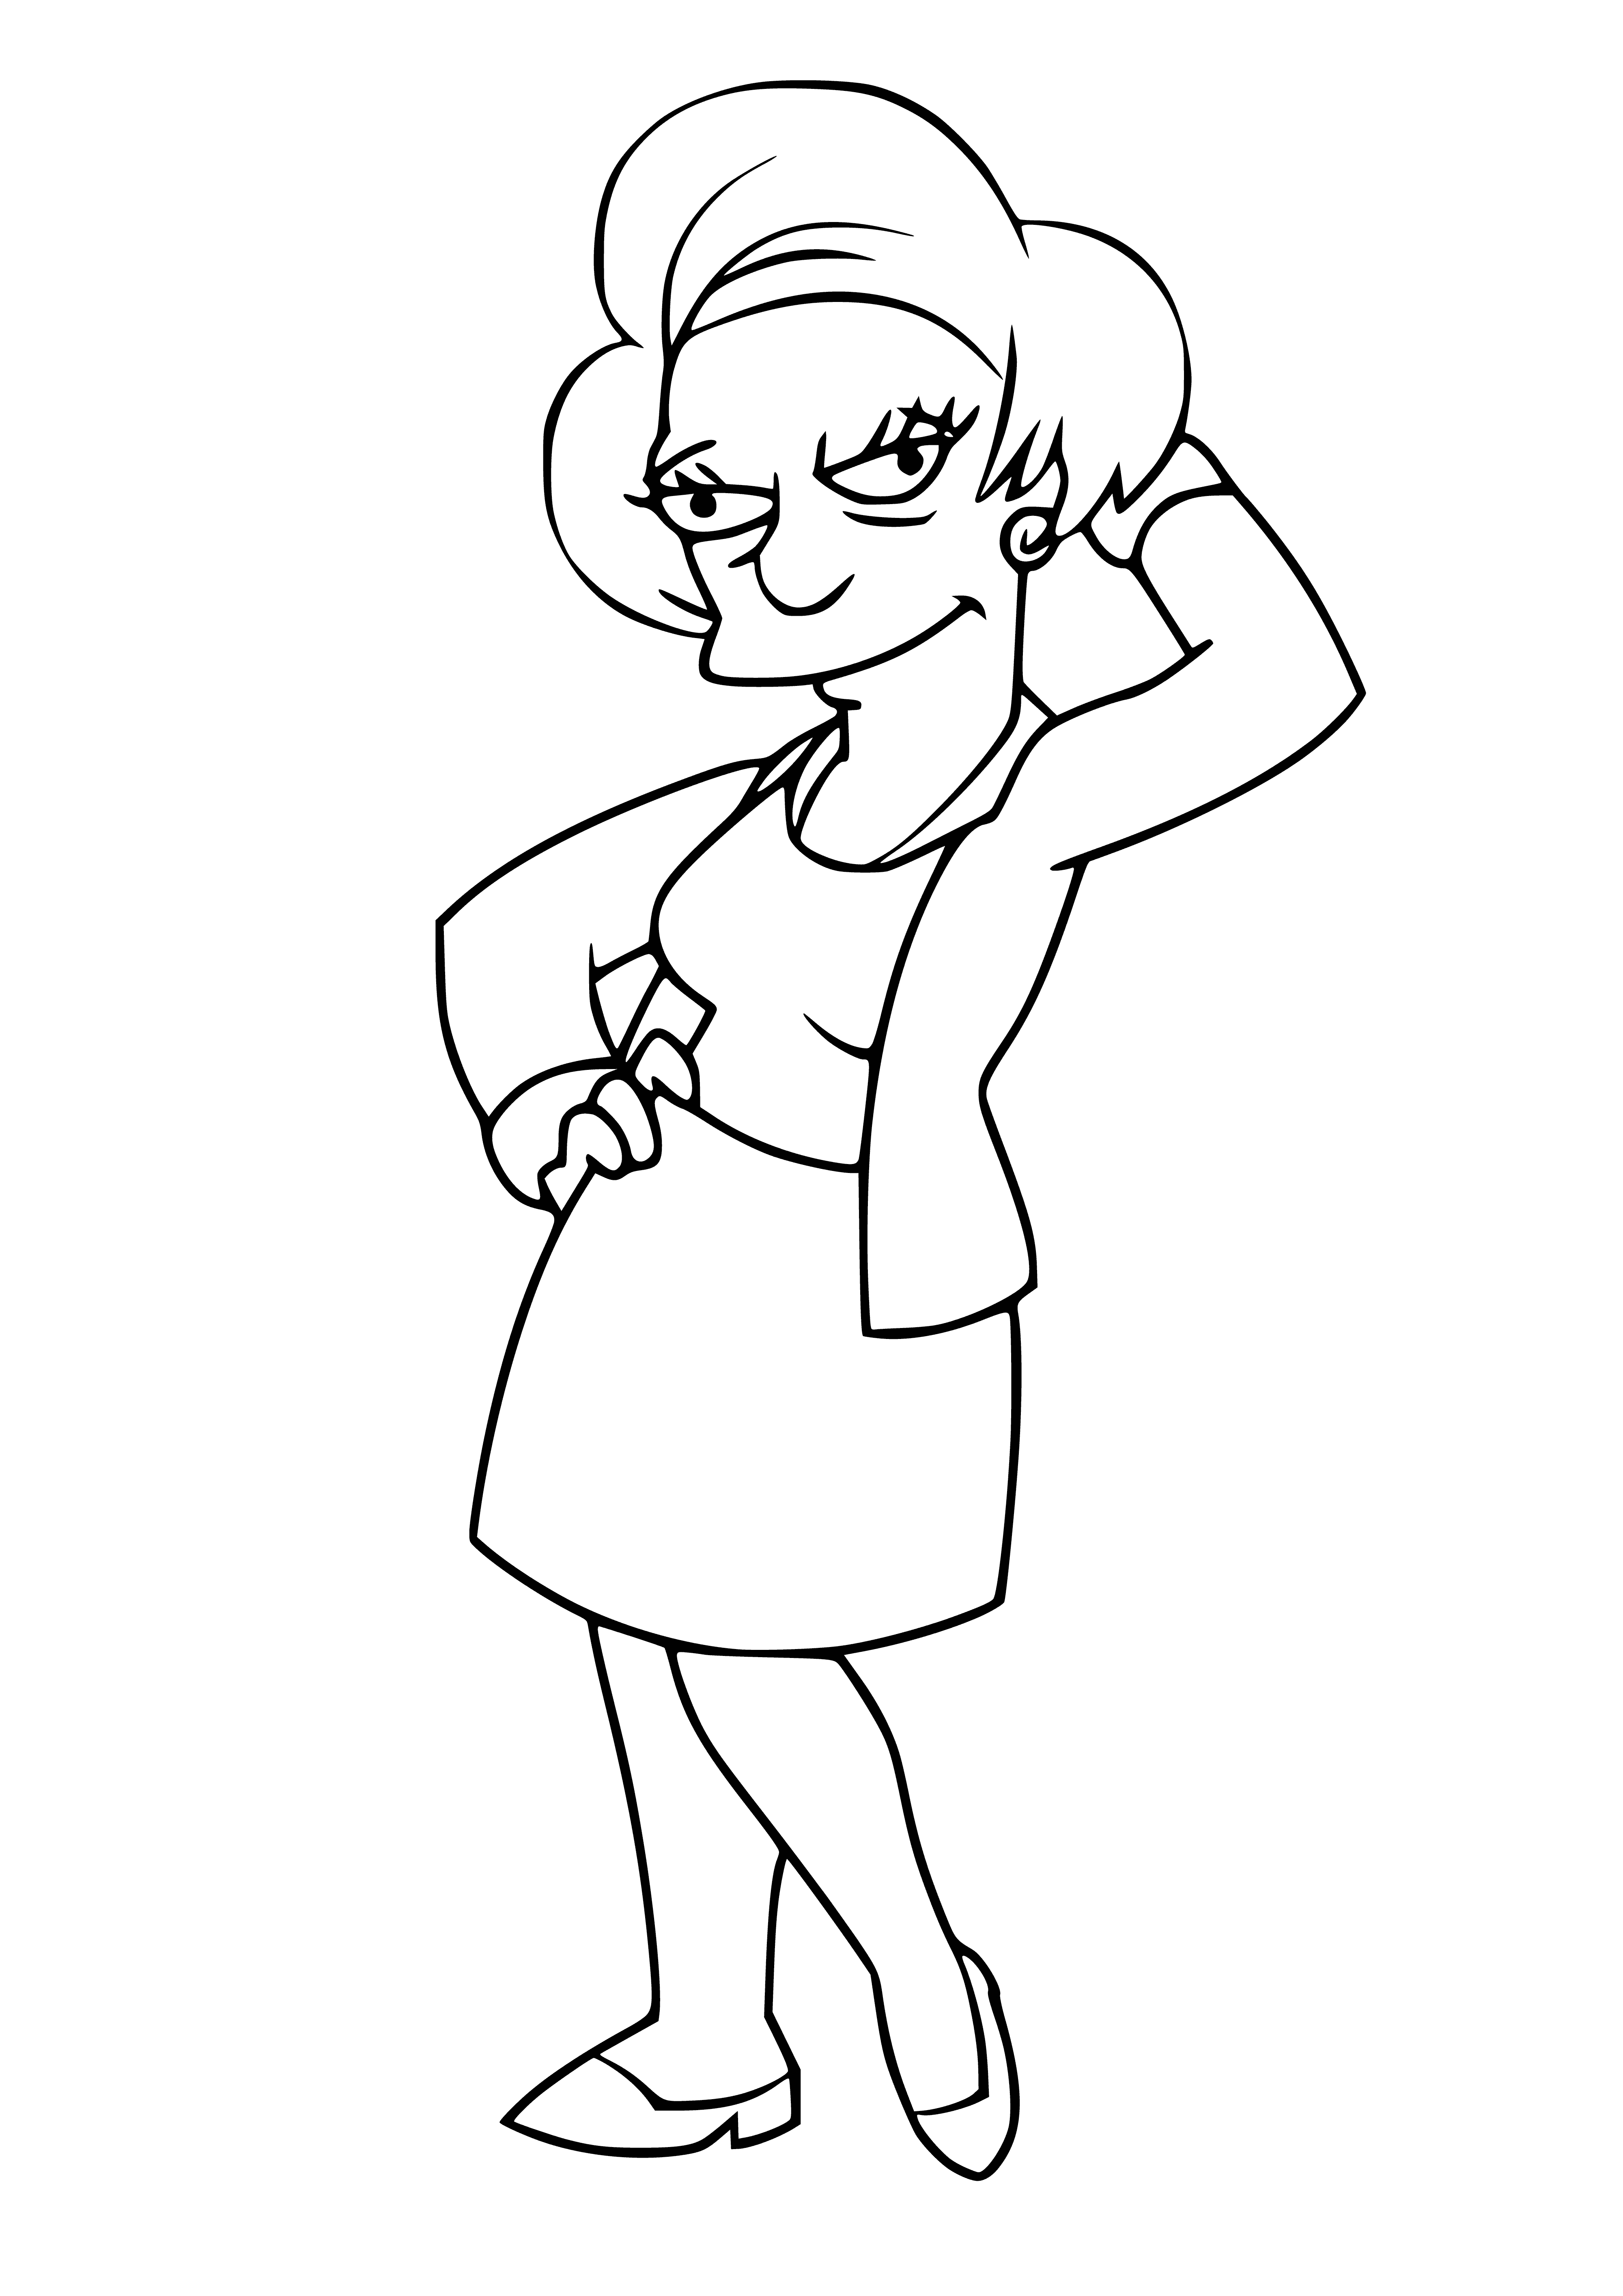 coloring page: Edna Crabapple from The Simpsons stands in her dress, smiling widely, holding a sponge. Eyes closed, hair pulled back in a bun.